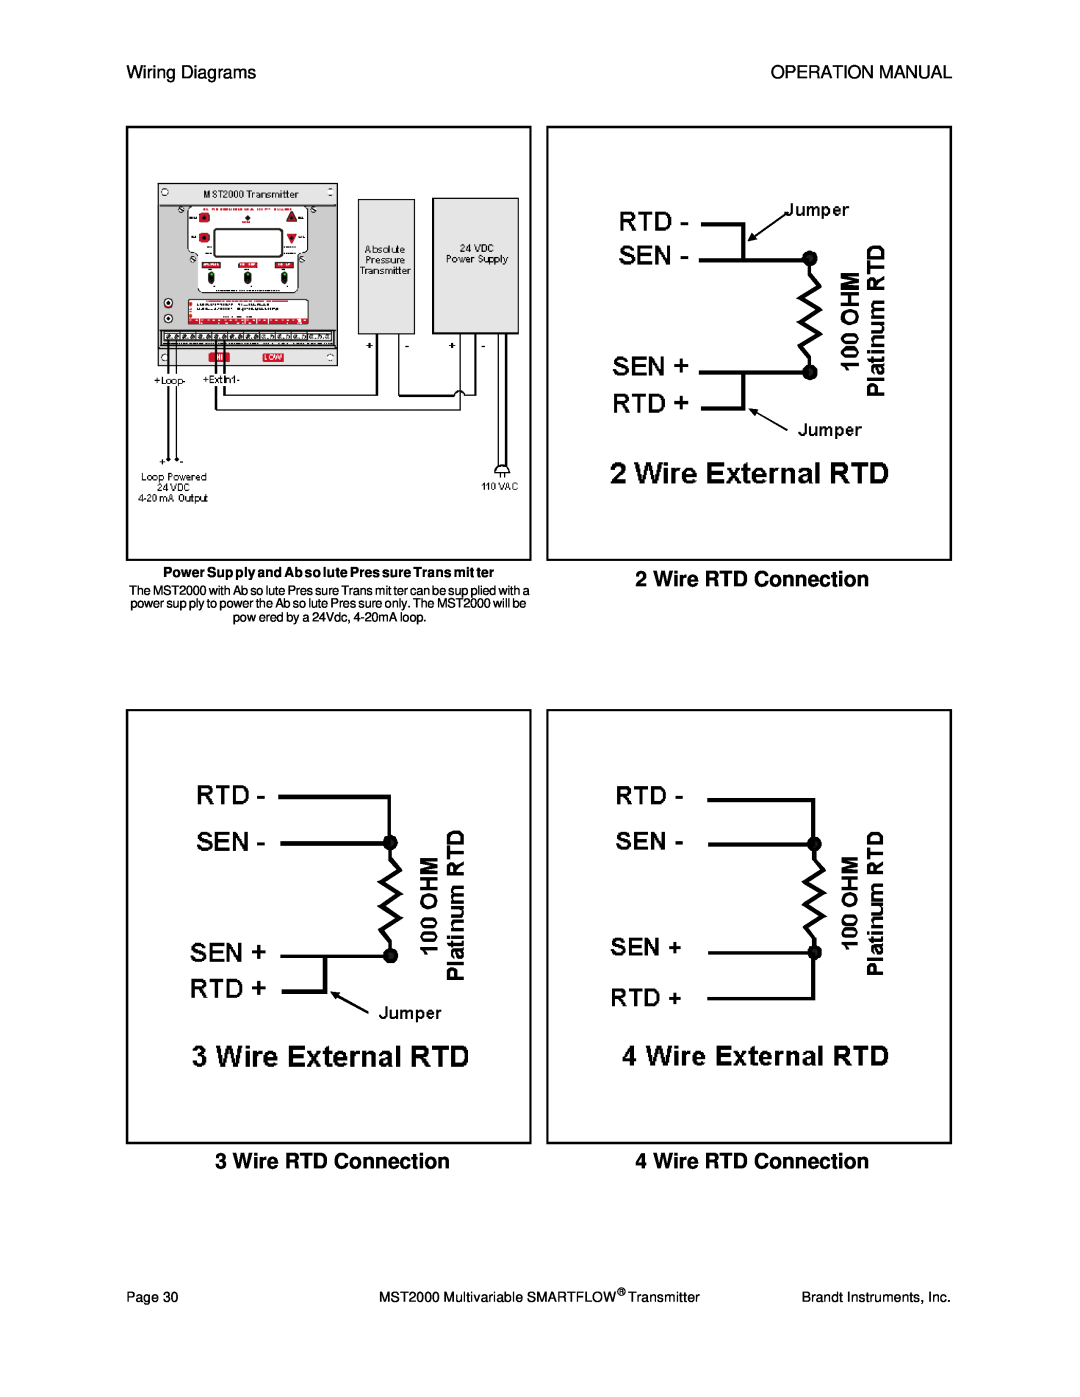 Tamron MST2000 operation manual Wire RTD Connection 4 Wire RTD Connection, Wiring Diagrams 